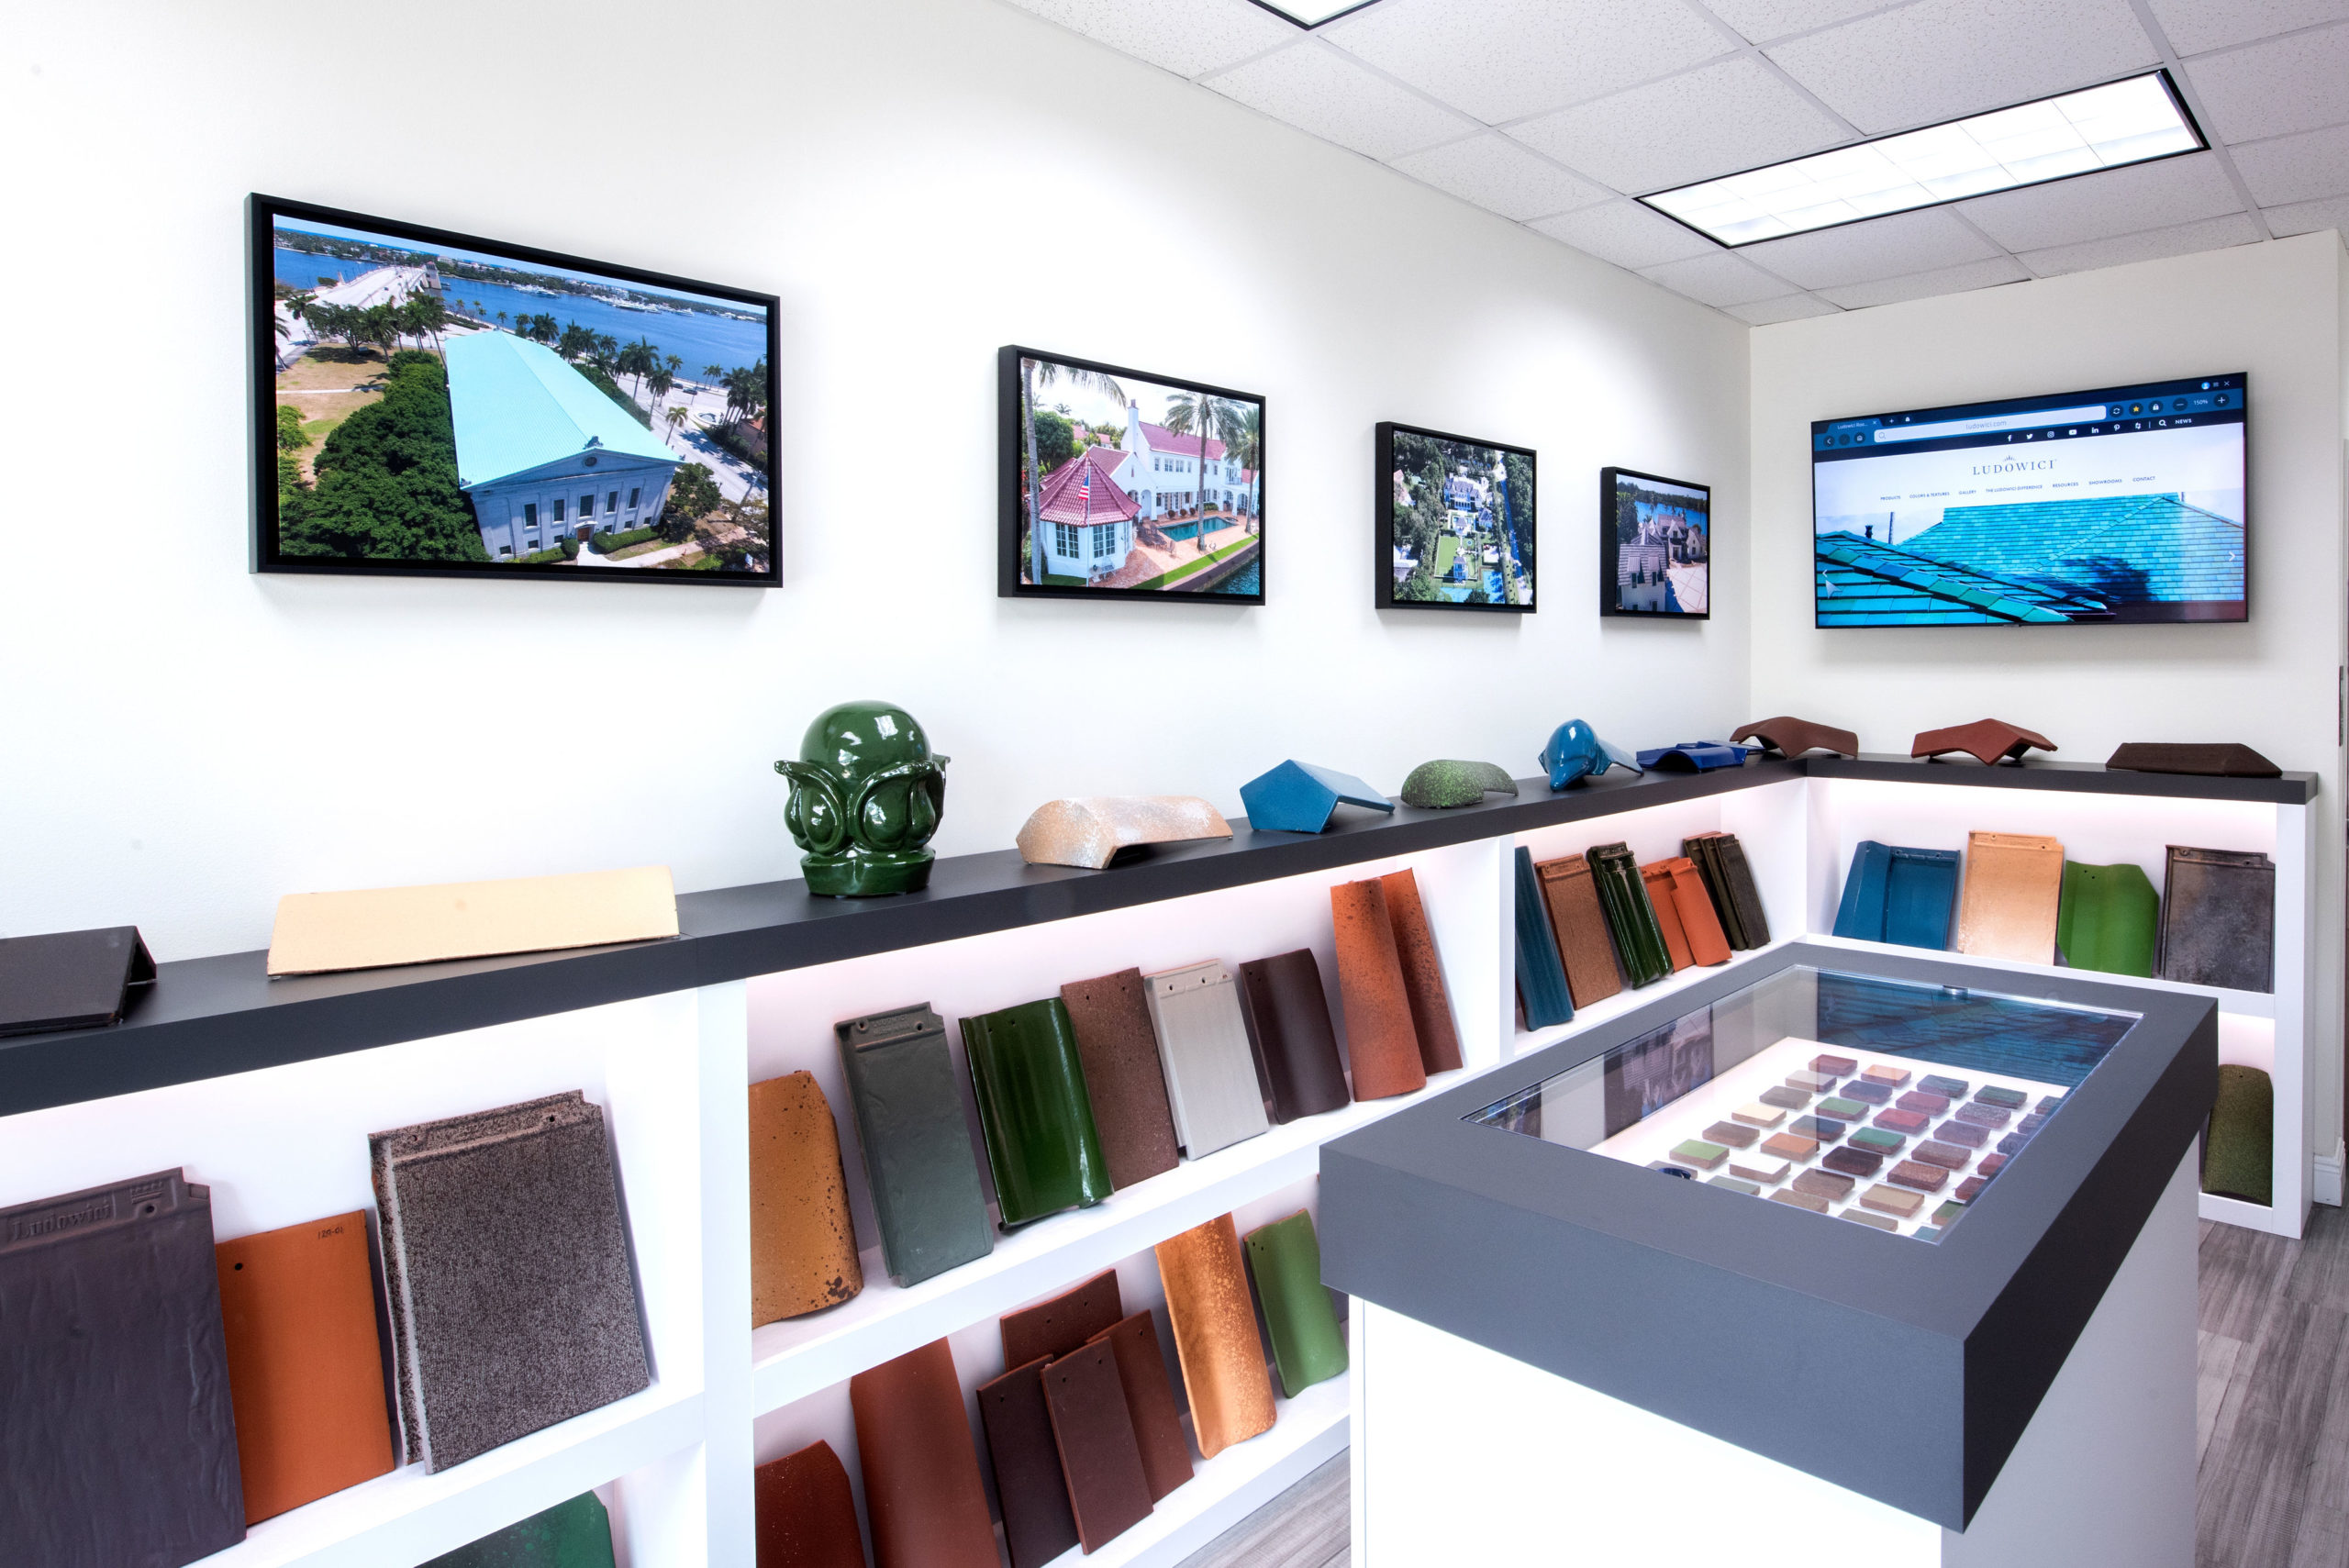 During your visit to our South Florida showroom, you will see many different terra cotta roof tile samples beautifully displayed to help inspire and experience the Ludowici difference. The design inspiration here is endless! 